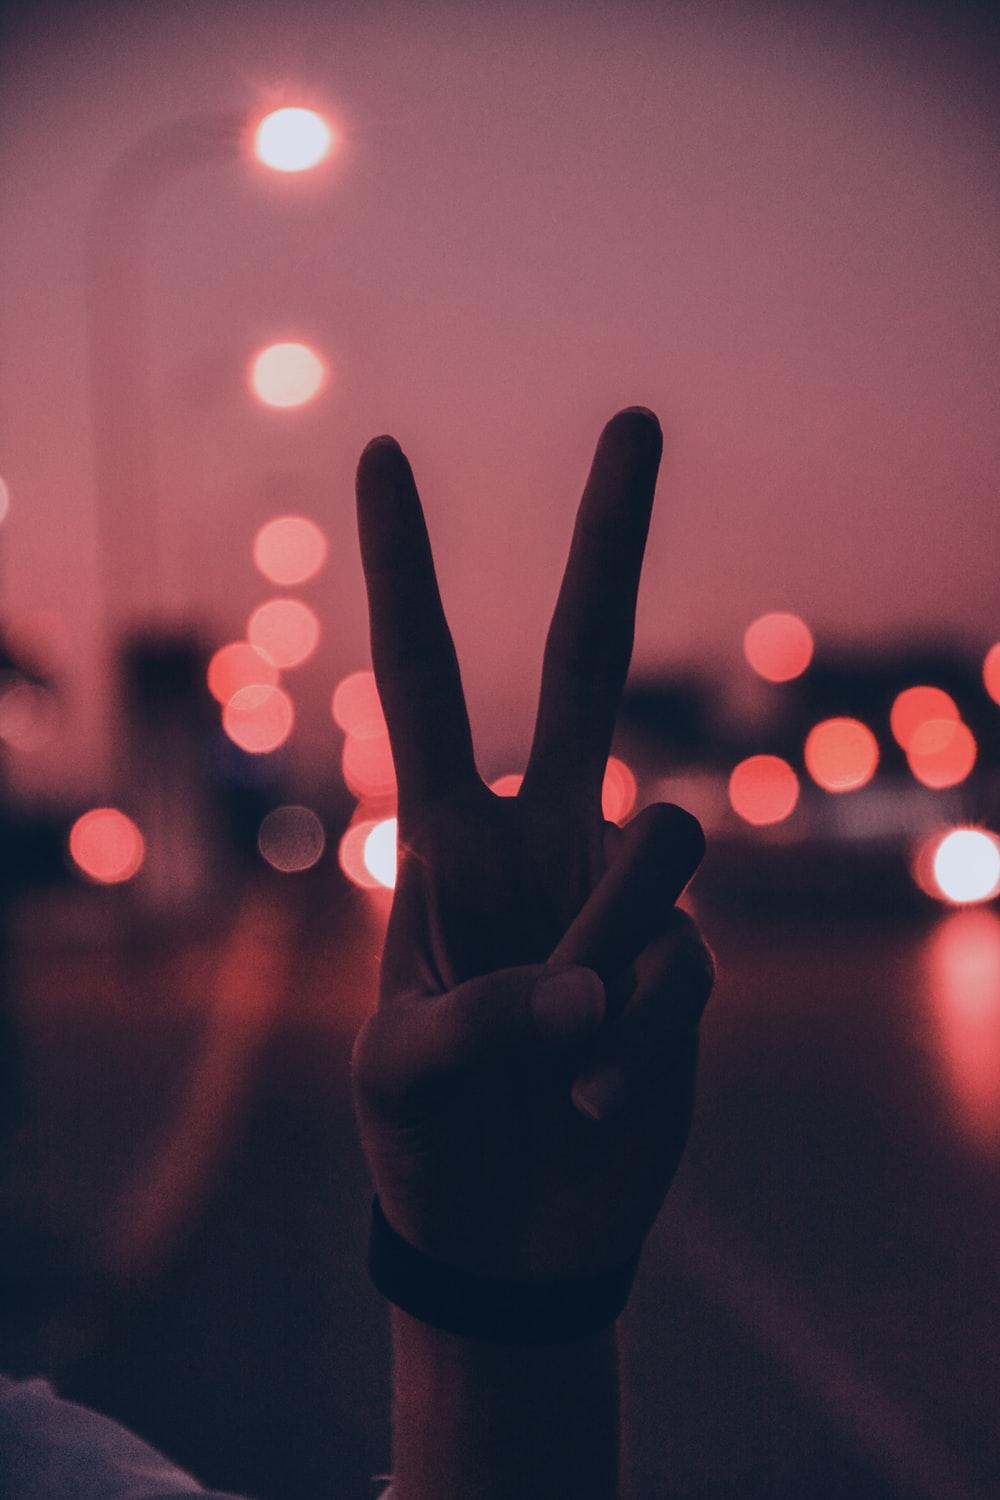 Hand Peace Sign Wallpapers Top Free Hand Peace Sign Backgrounds